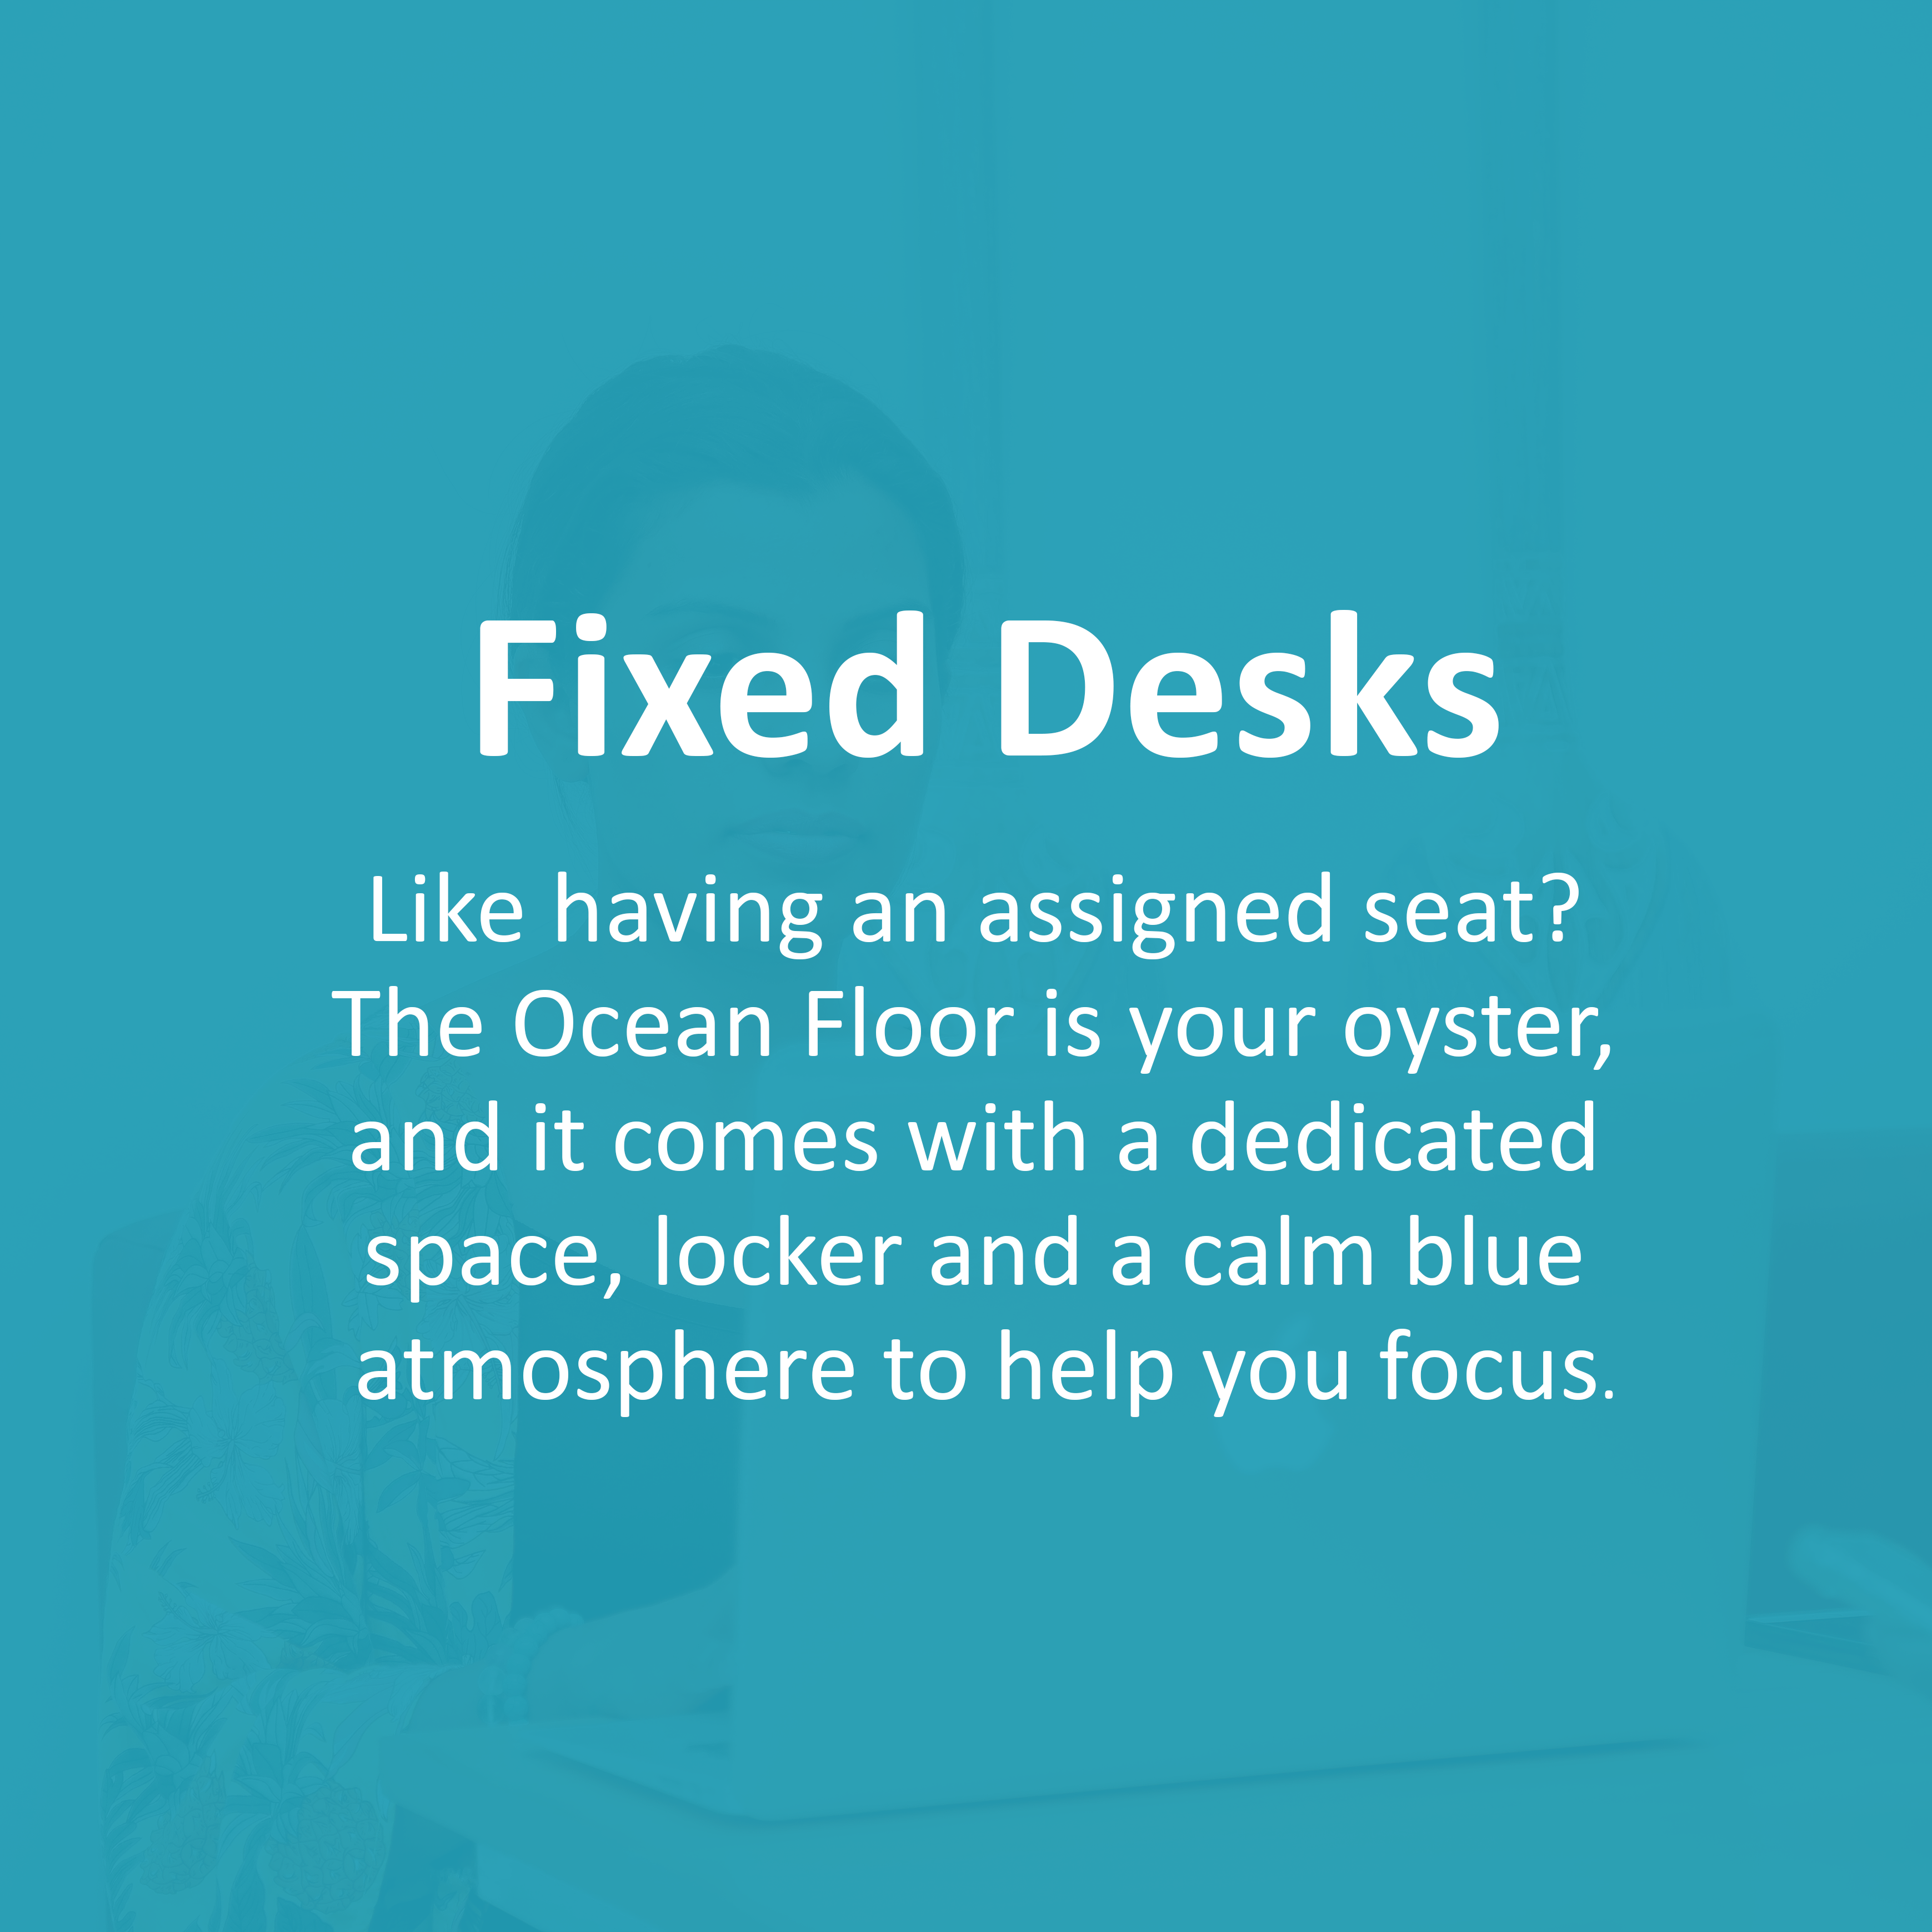 Fixed Desk Packages